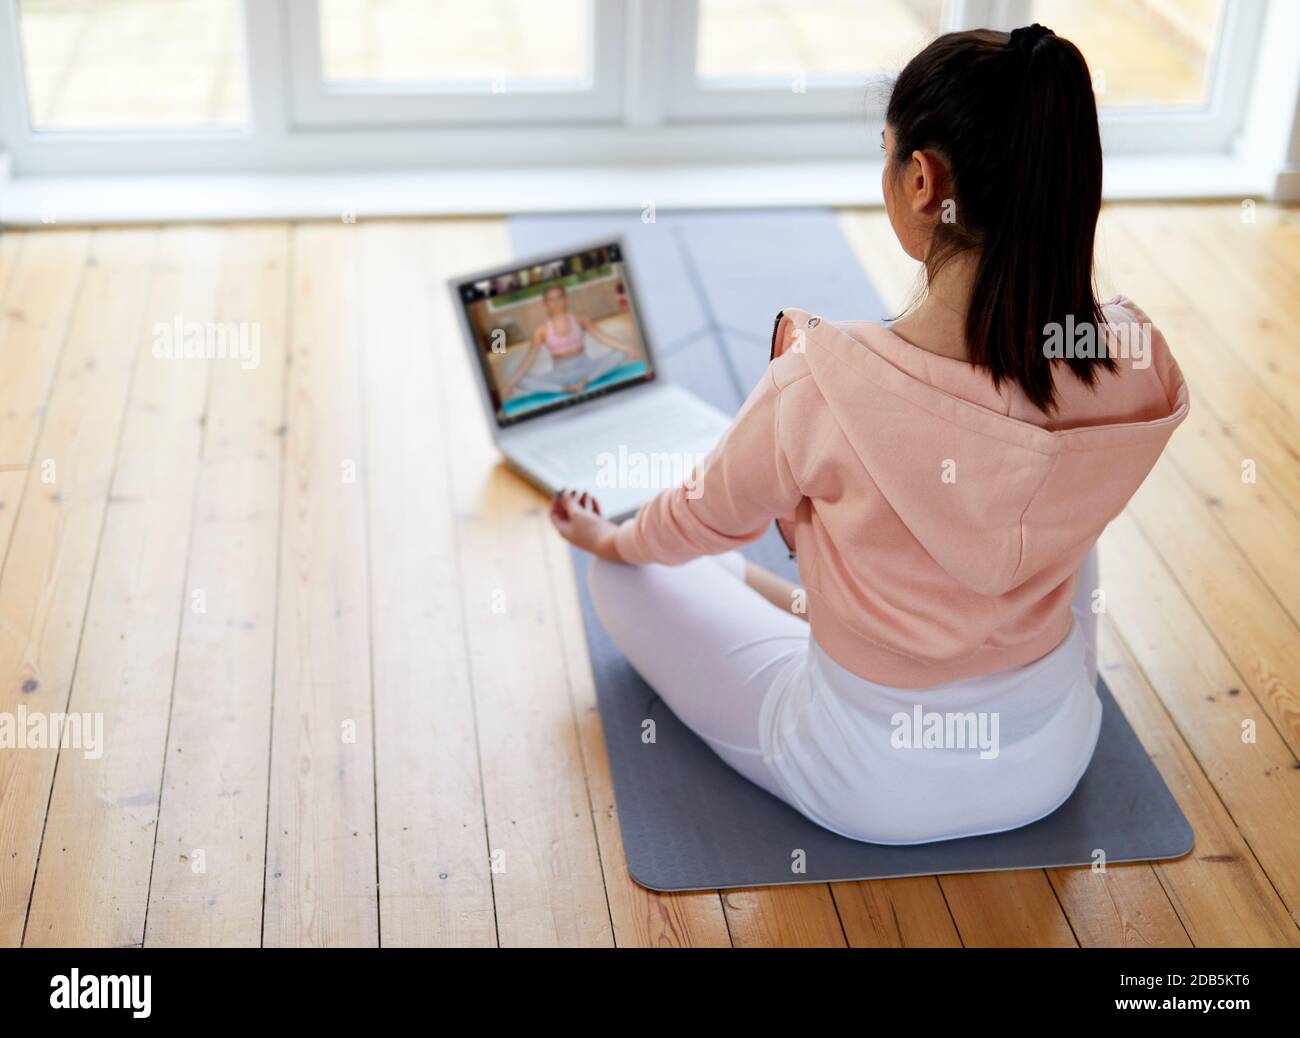 Woman working out to online workout program Stock Photo